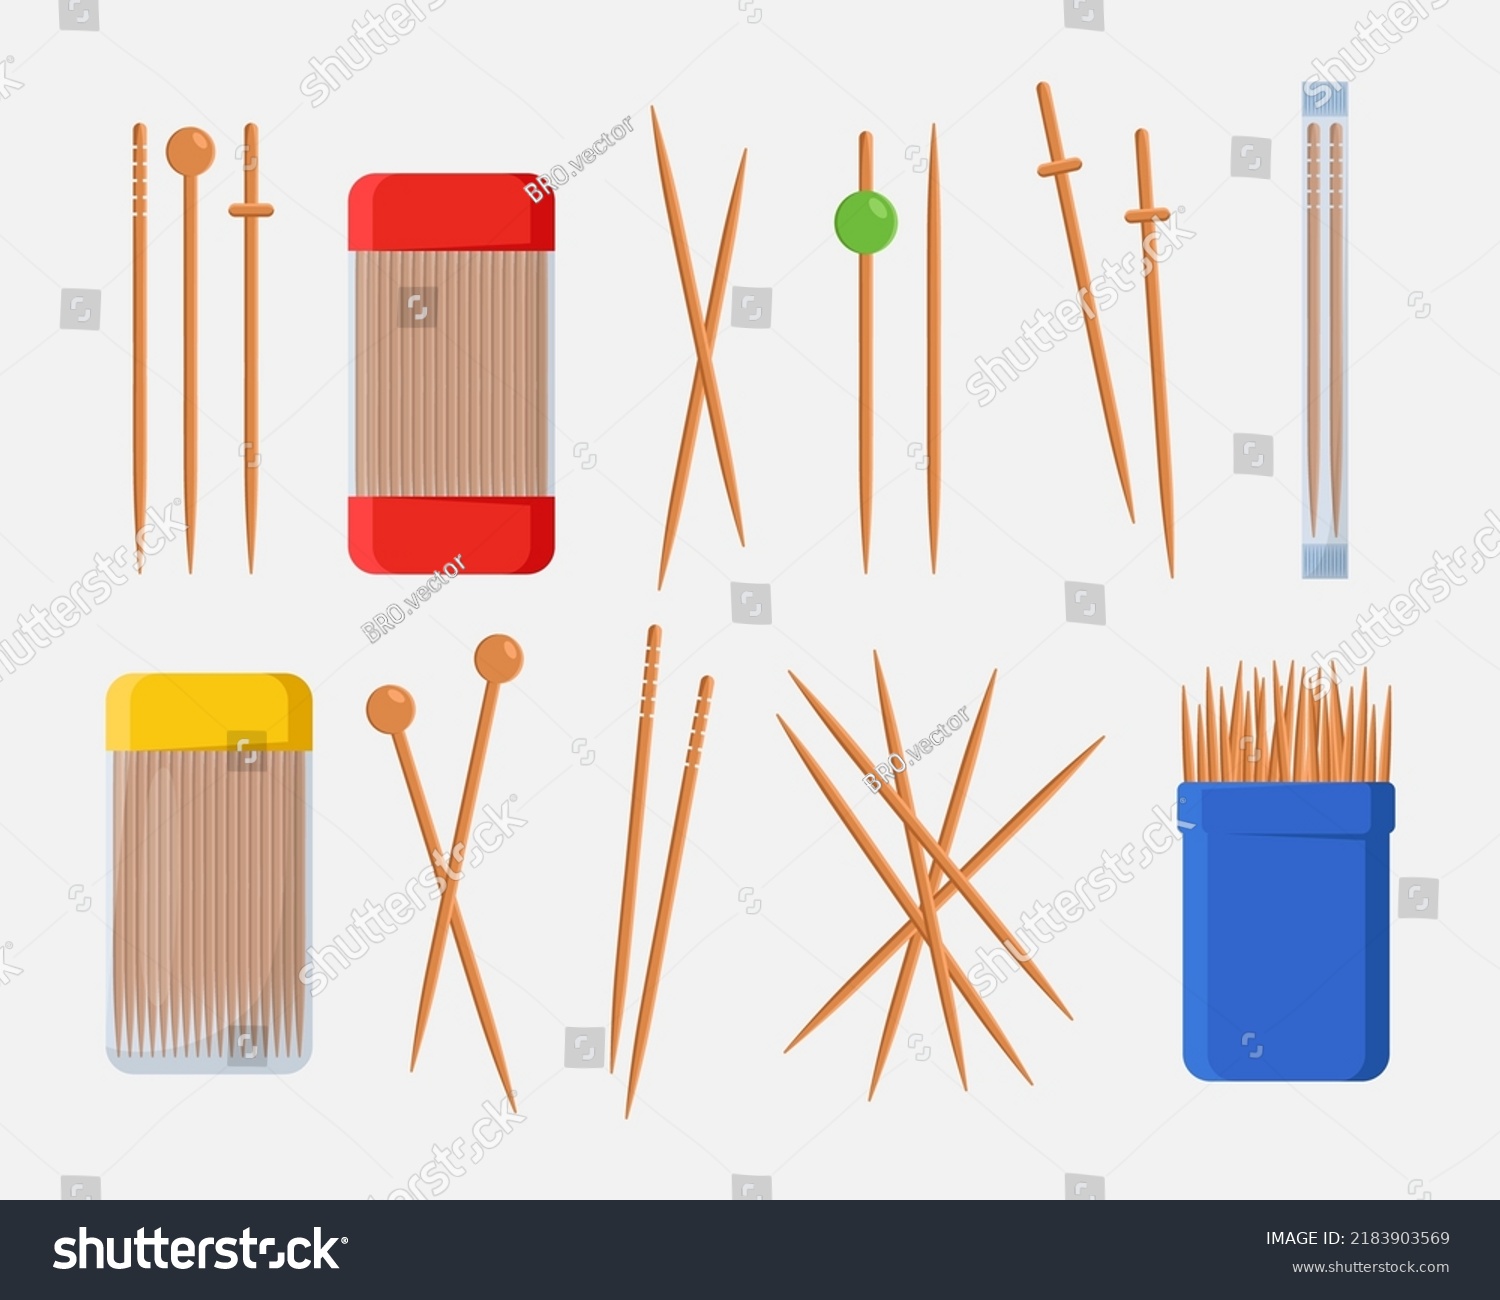 SVG of Toothpicks for cocktails or food vector illustrations set. Wooden picks or sticks for drinks or picking teeth isolated on white background. Food, dental or oral hygiene, party concept svg